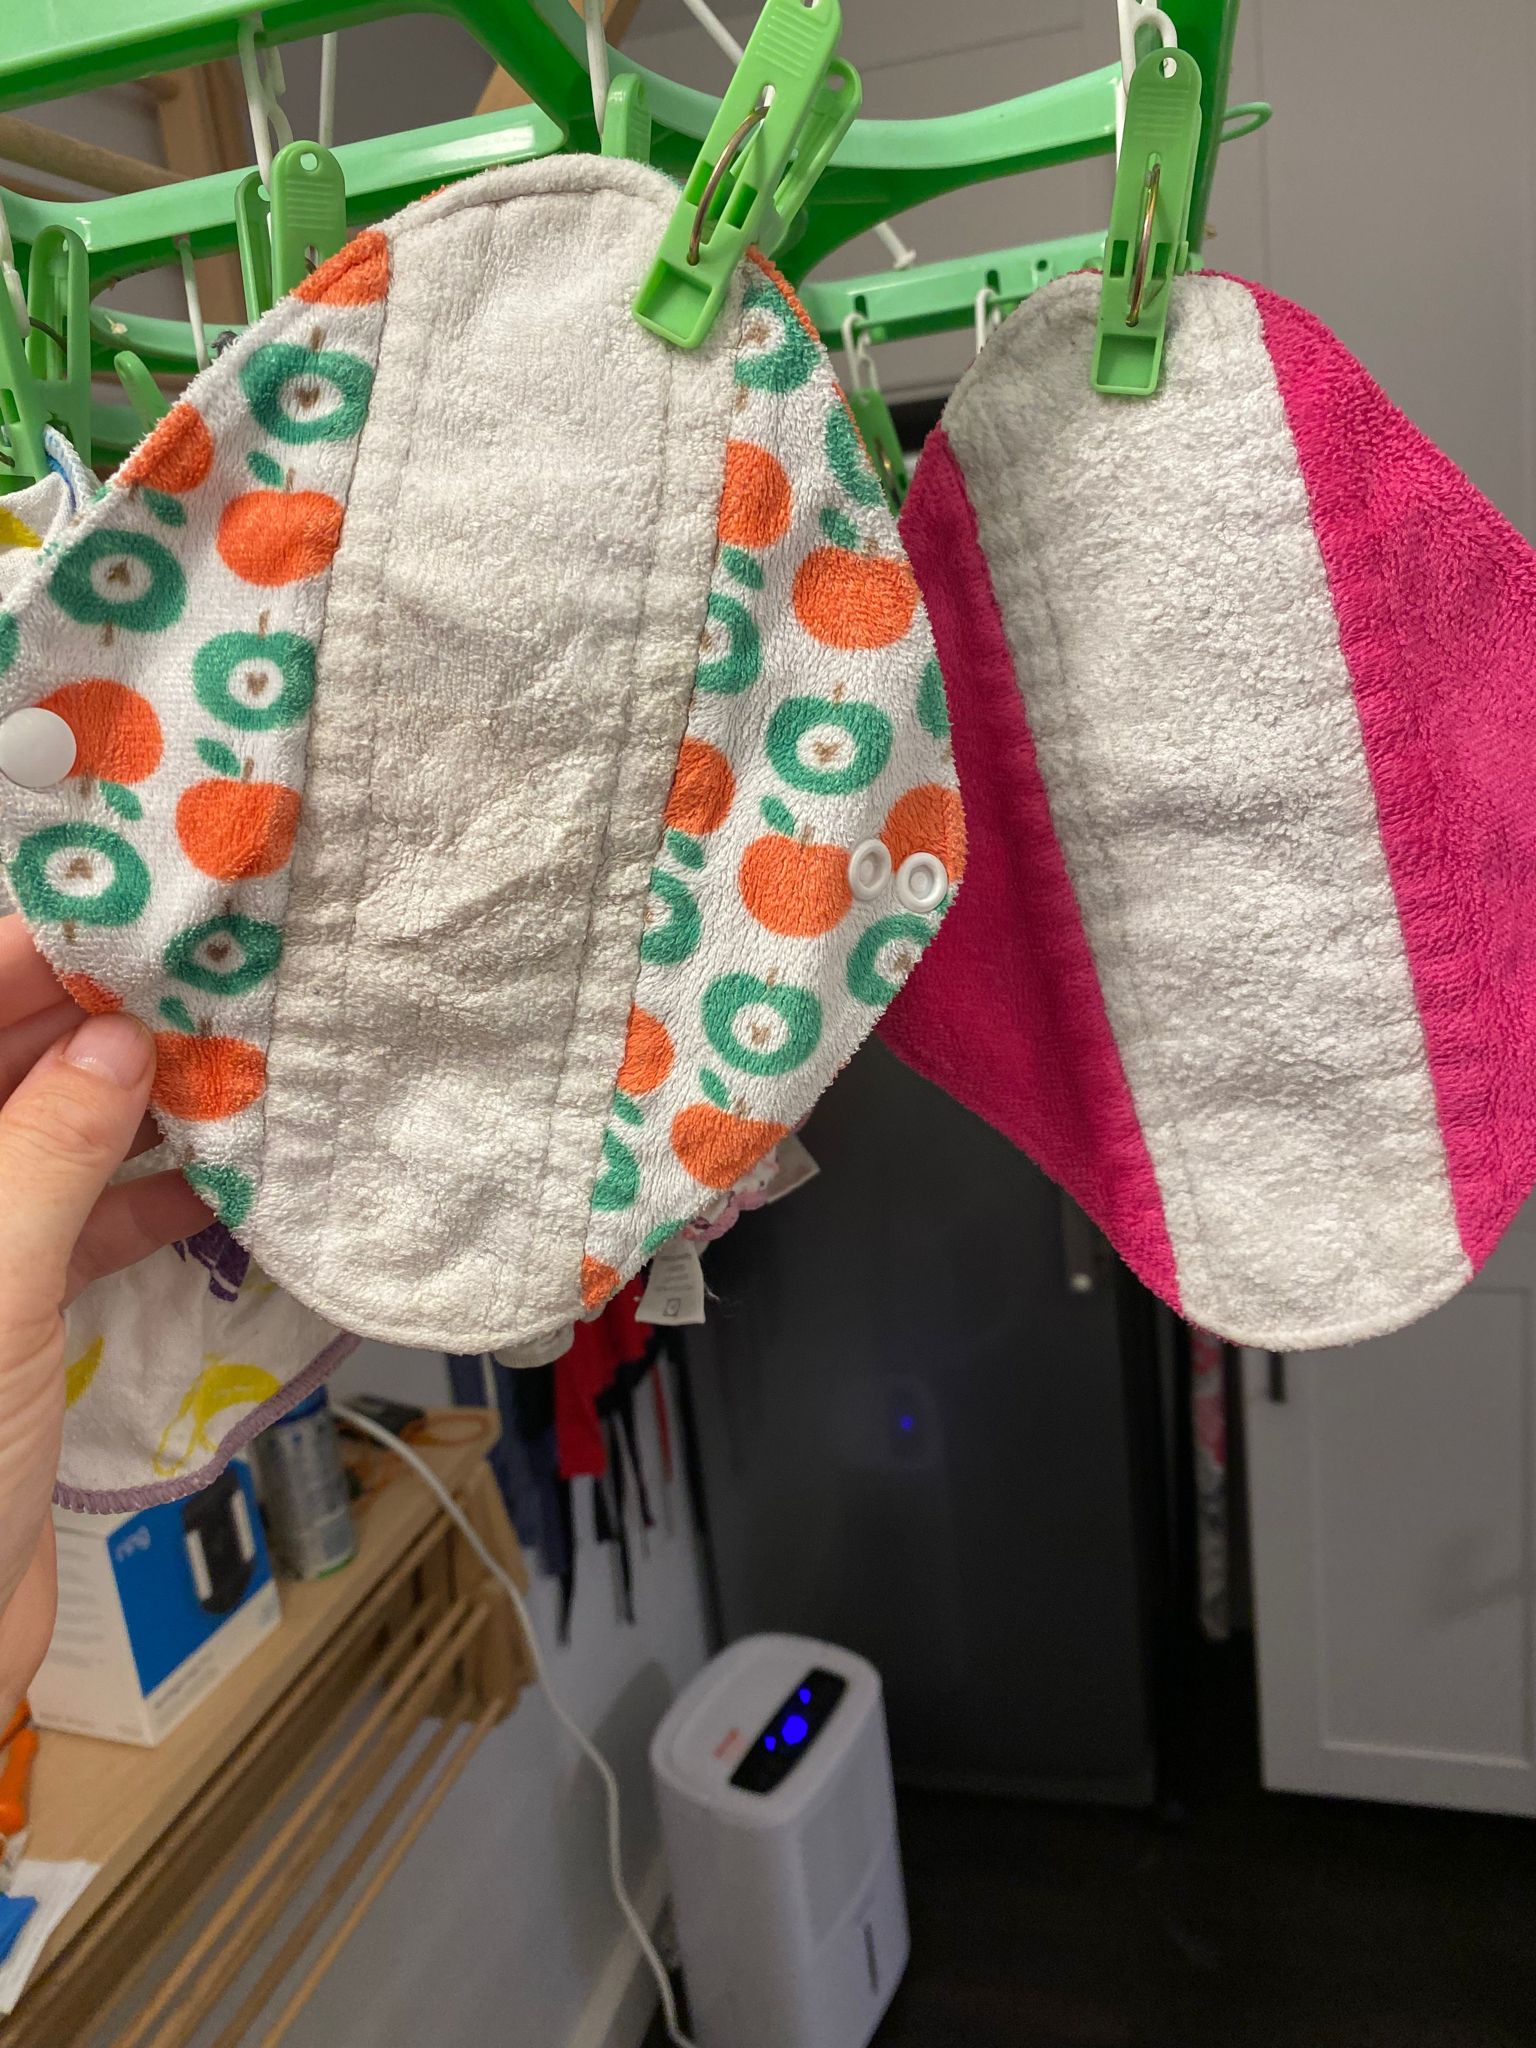 How to wash reusable period pads or period underwear — Berries & Bundles